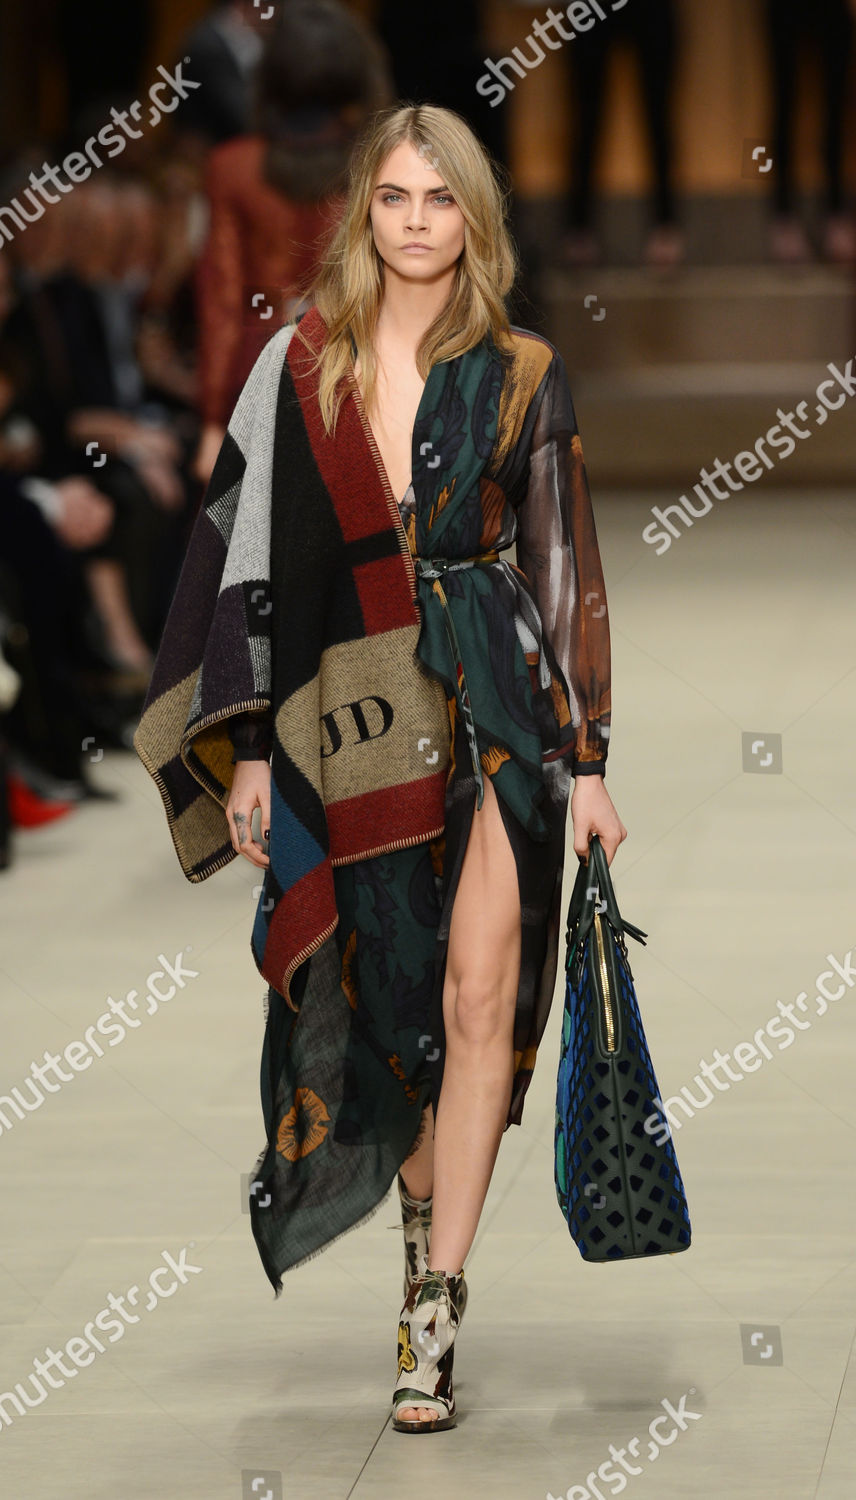 London Fashion Week Aw 201415 Delevingne Editorial Stock Photo Image Shutterstock